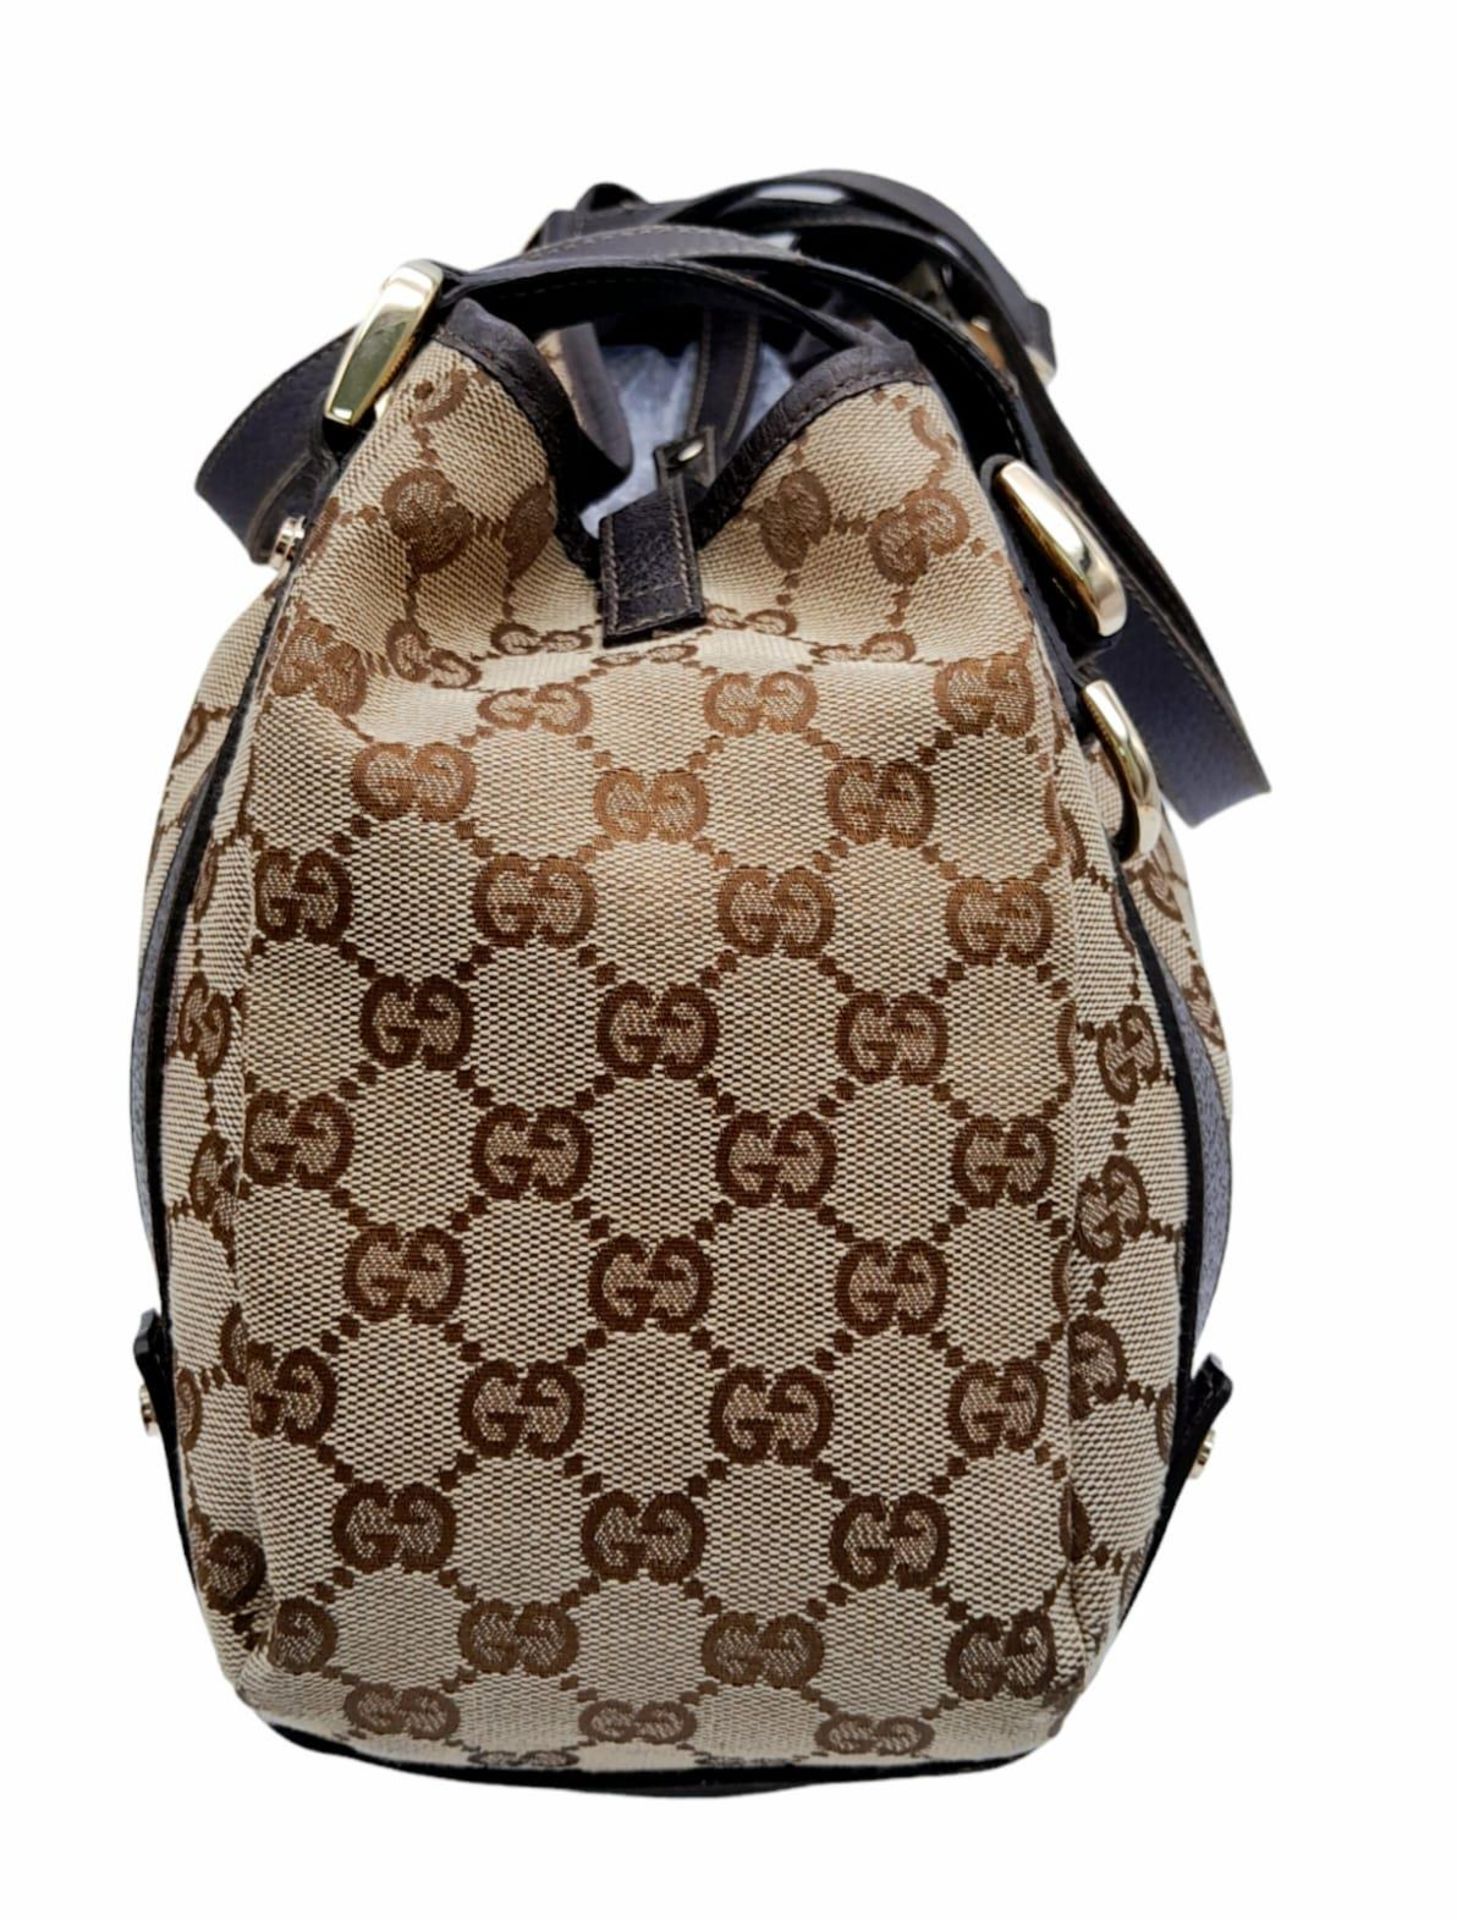 A Gucci Brown Monogram 'Abbey' Shoulder Bag. Canvas exterior with leather trim, gold-toned hardware, - Image 3 of 8